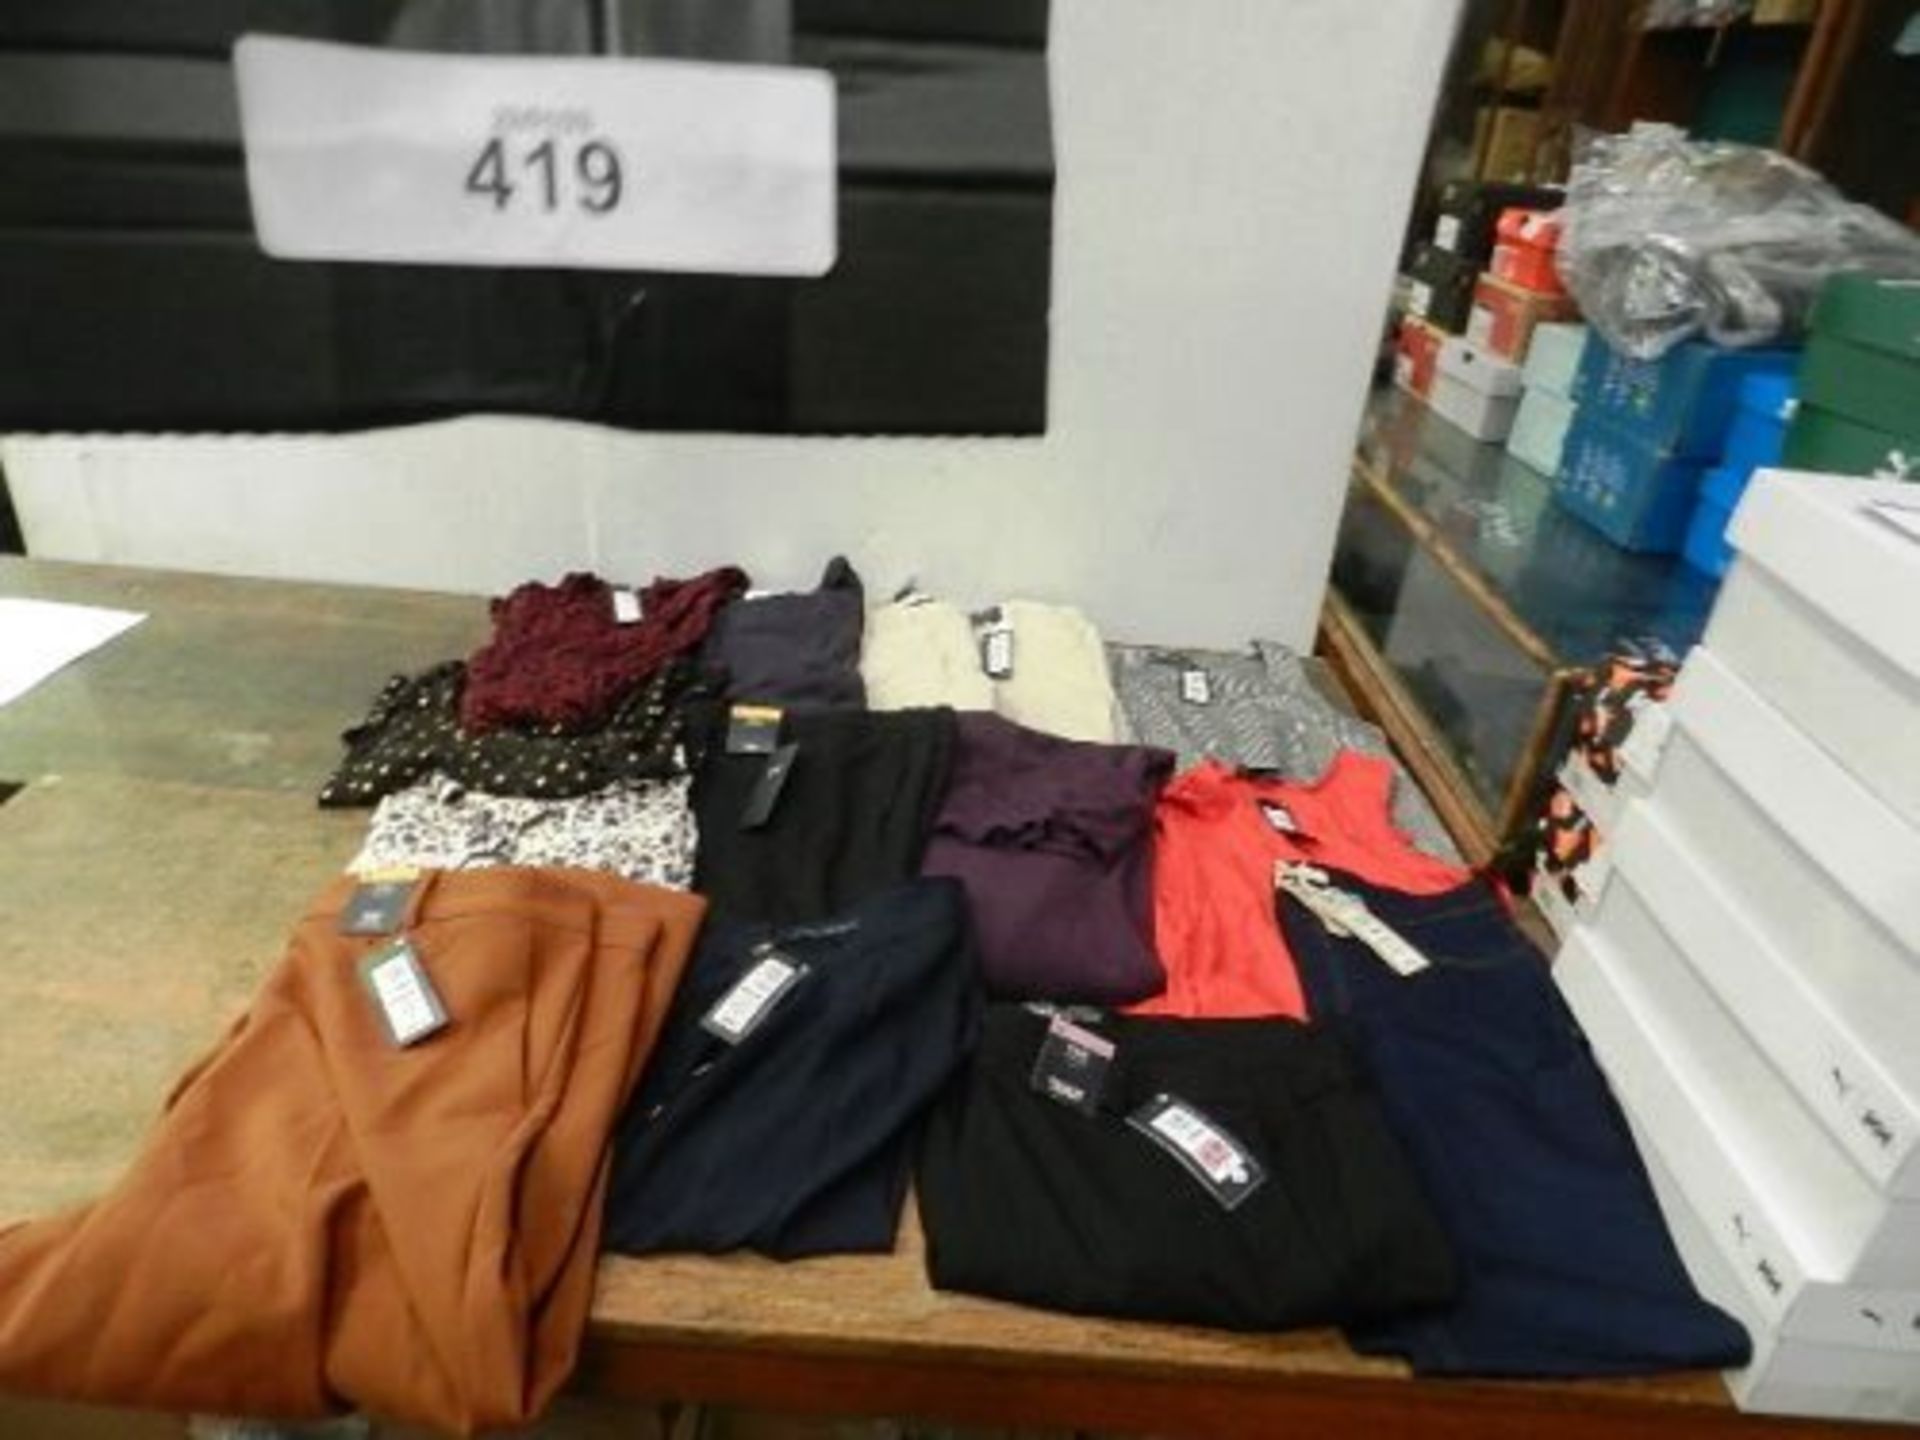 A quantity of M&S and Per Una clothing, various sizes, including tops, dresses and trousers - New (